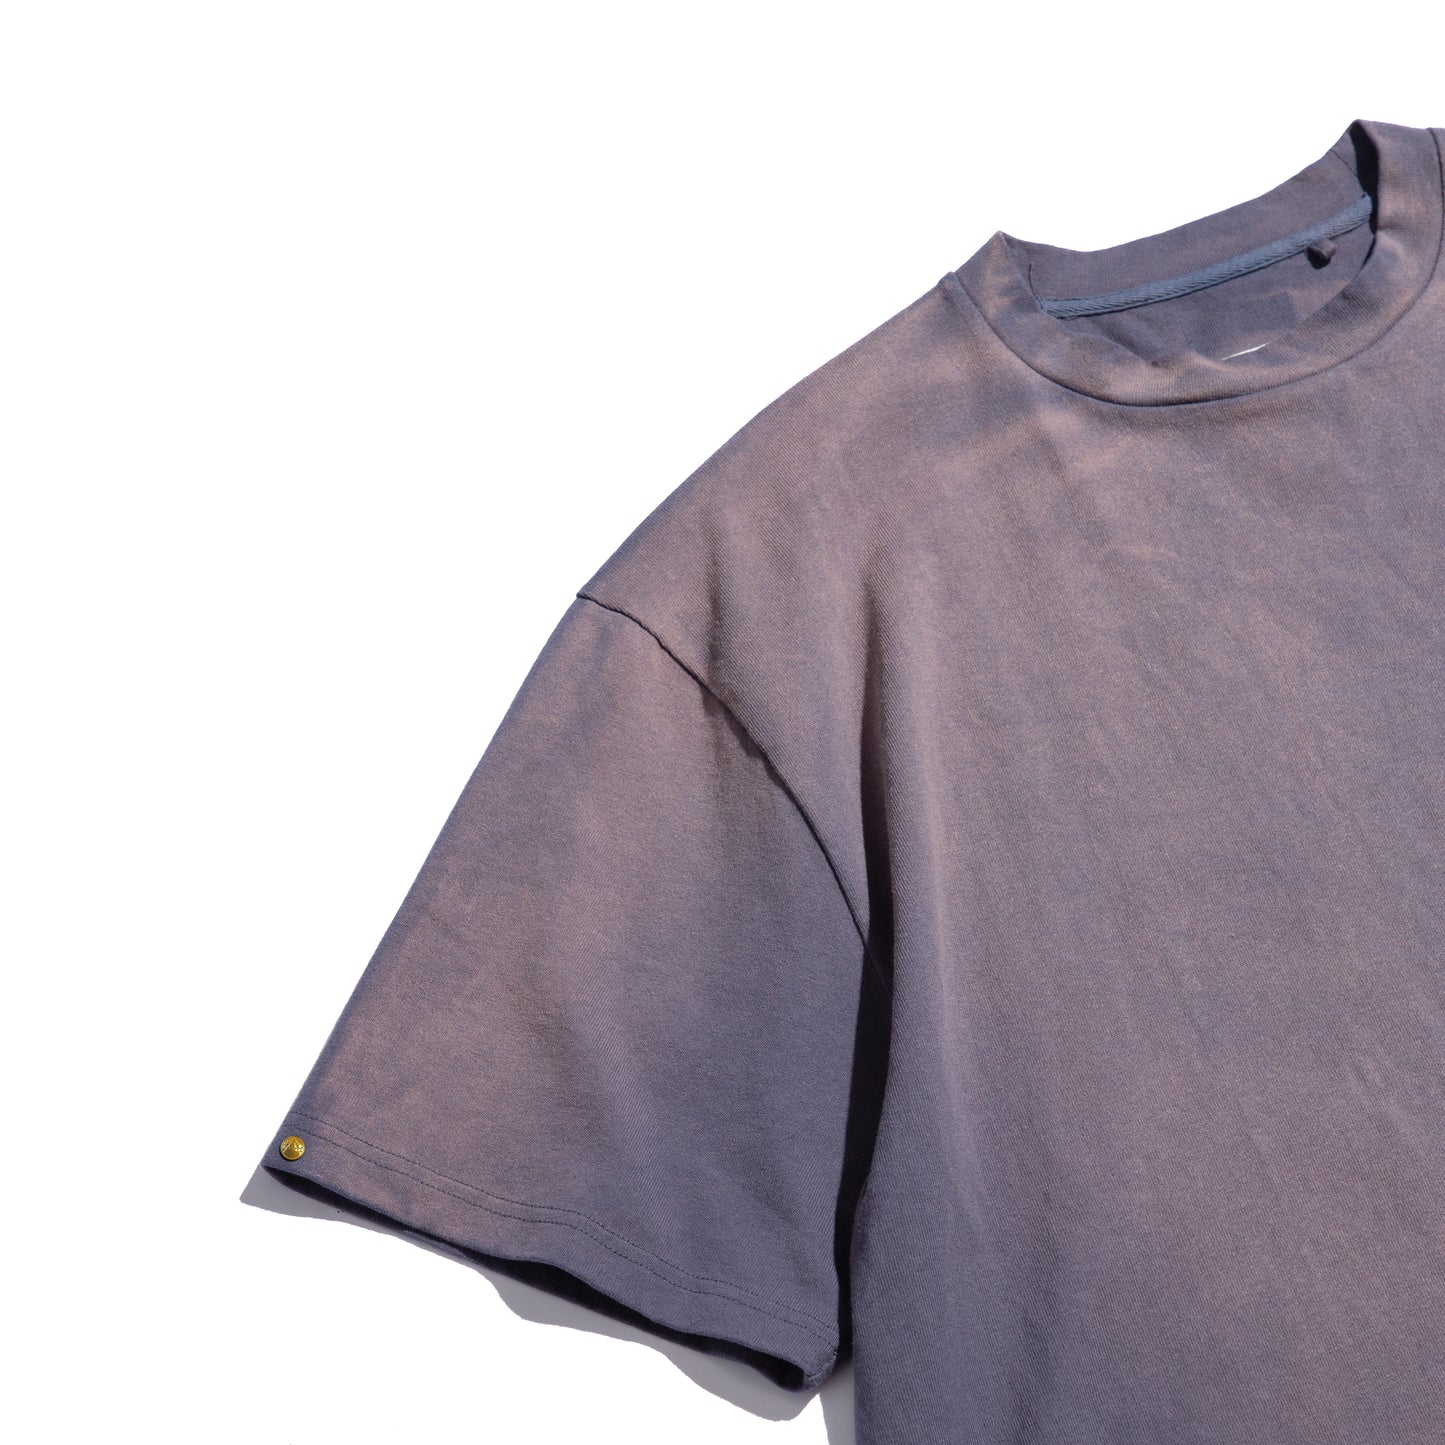 Faded Washed S/S Pocket Big Tee / Faded Charcoal